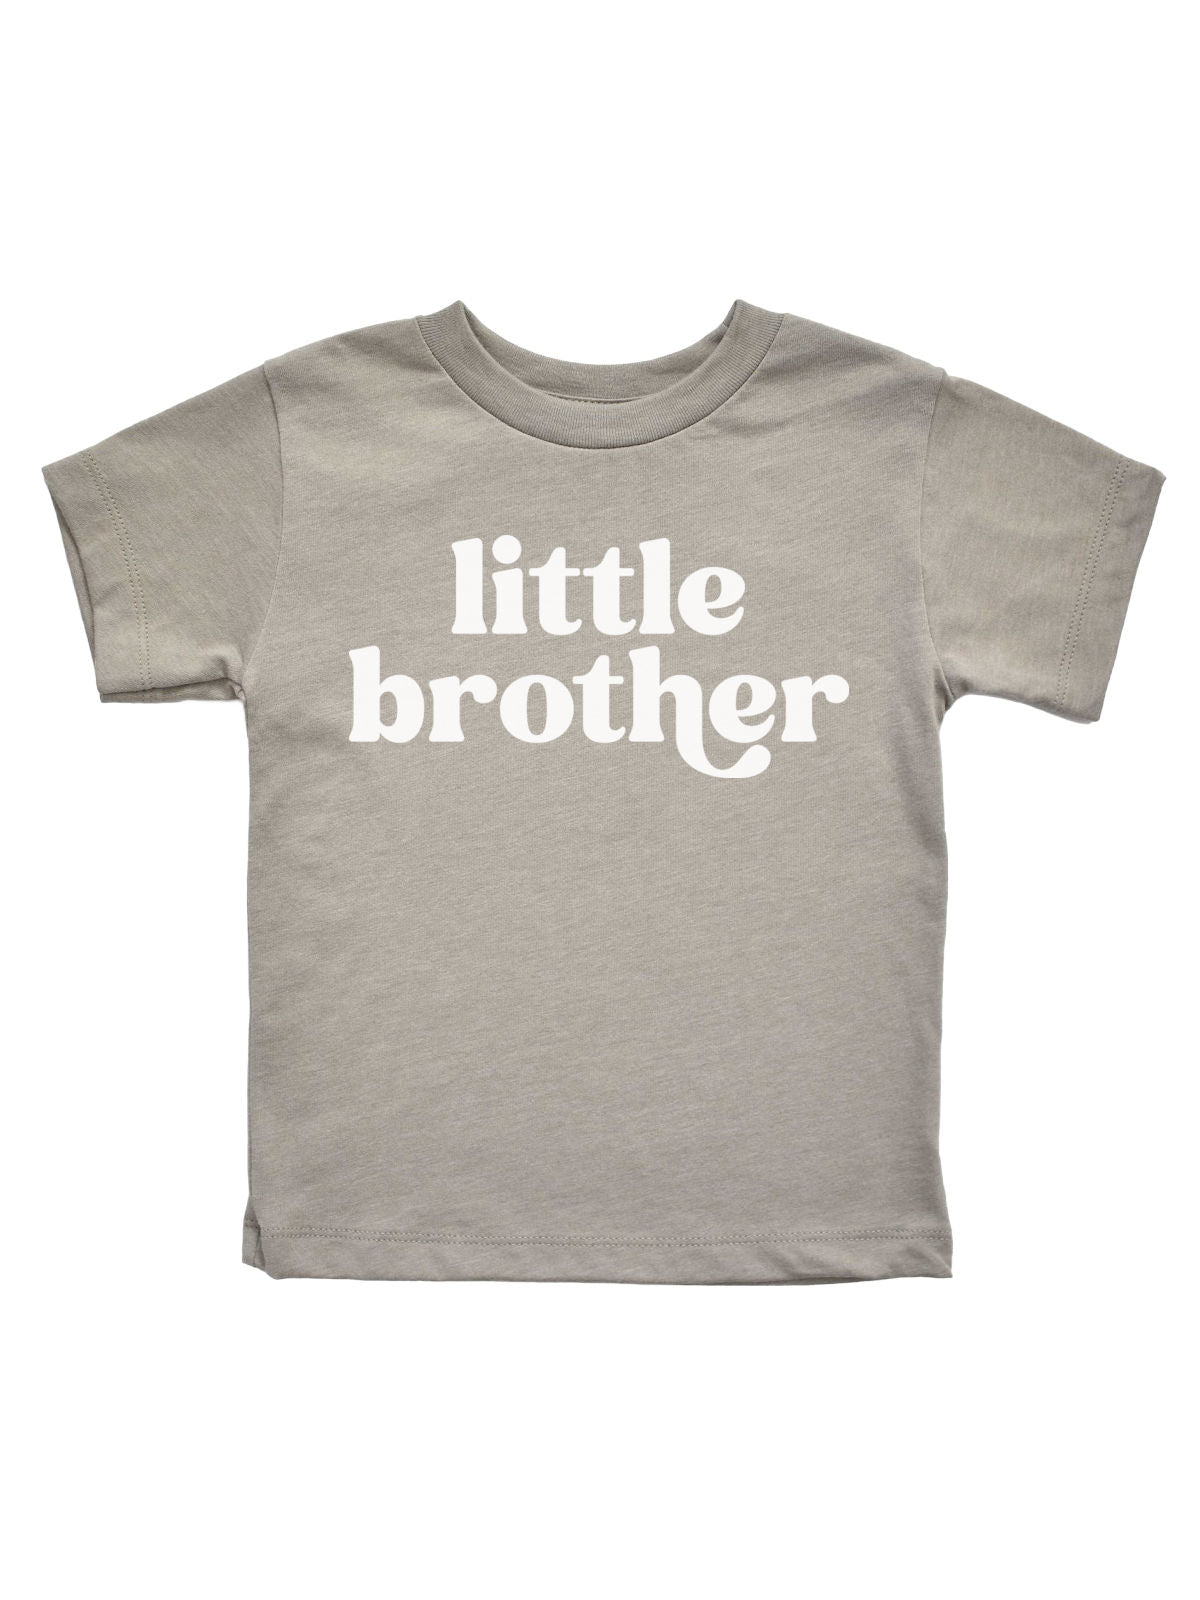 Little Brother Baby Boy Shirt in Stone